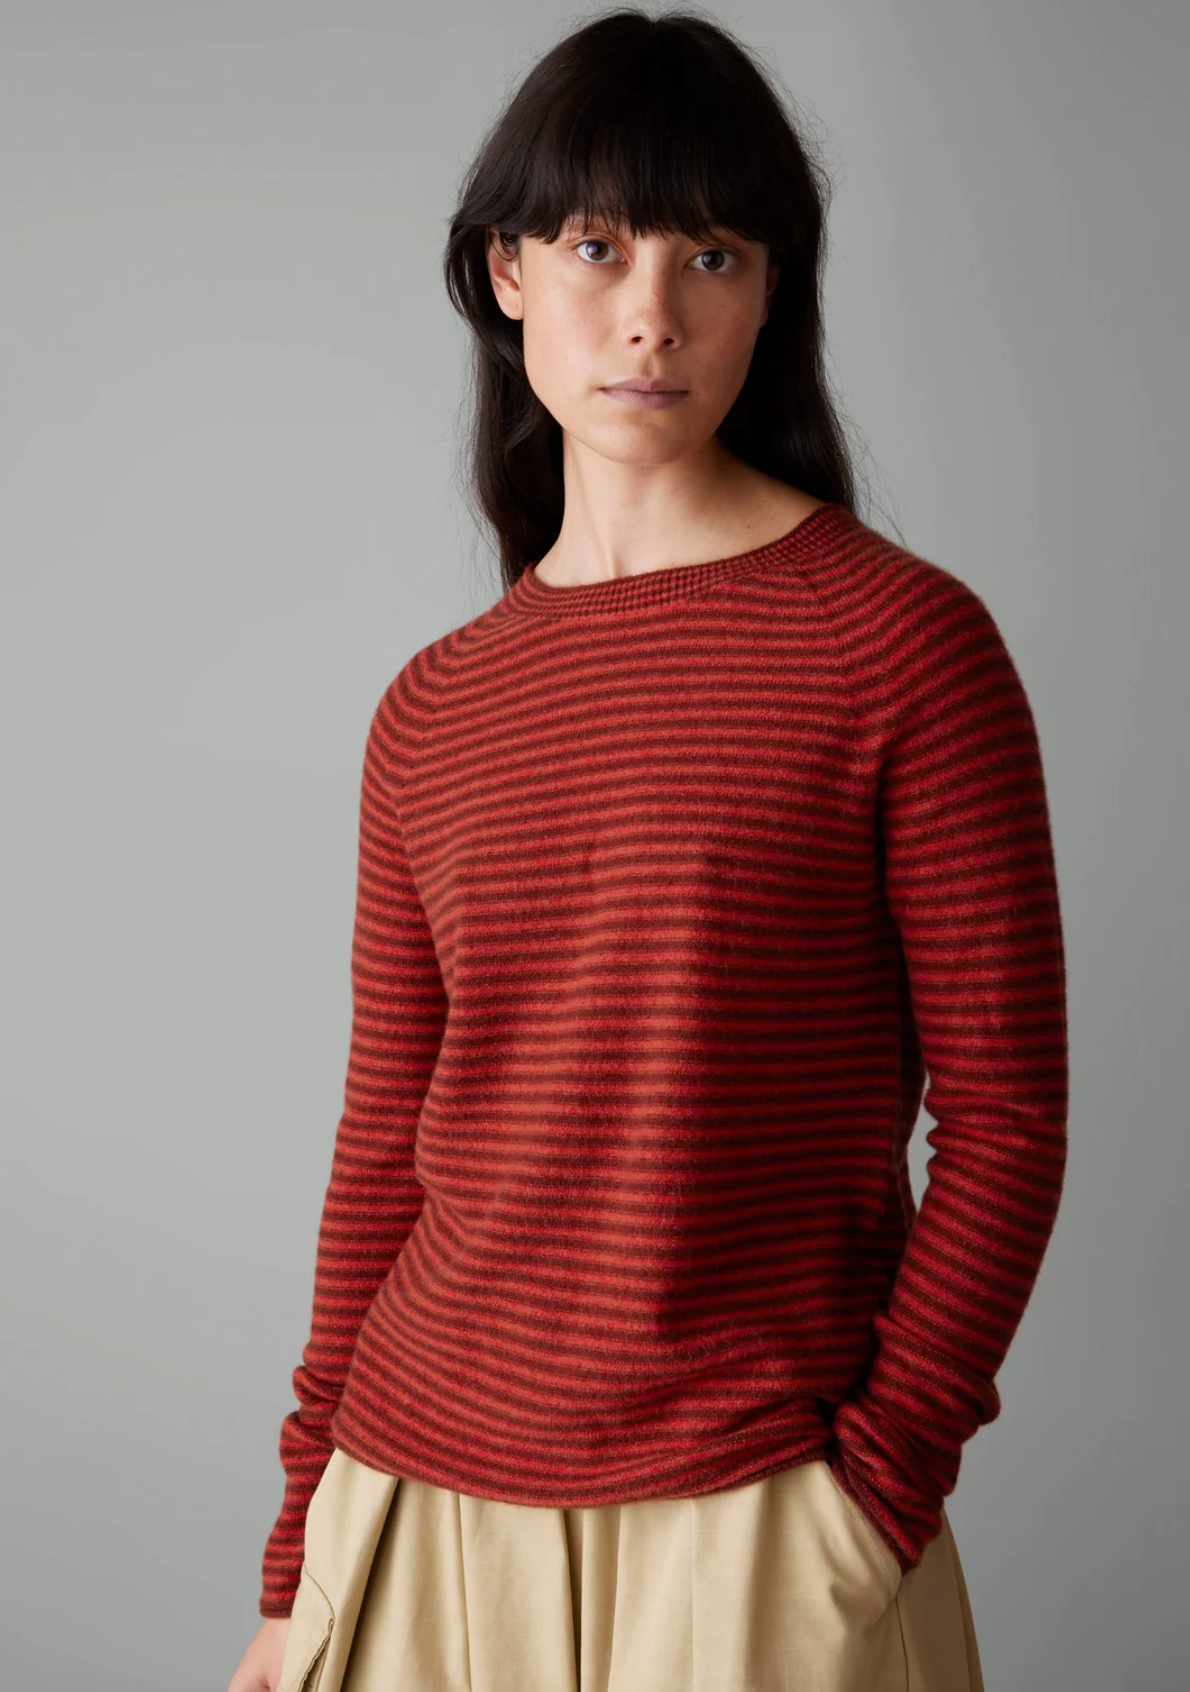 Wool Cashmere Neat Sweater Red Earth Harissa